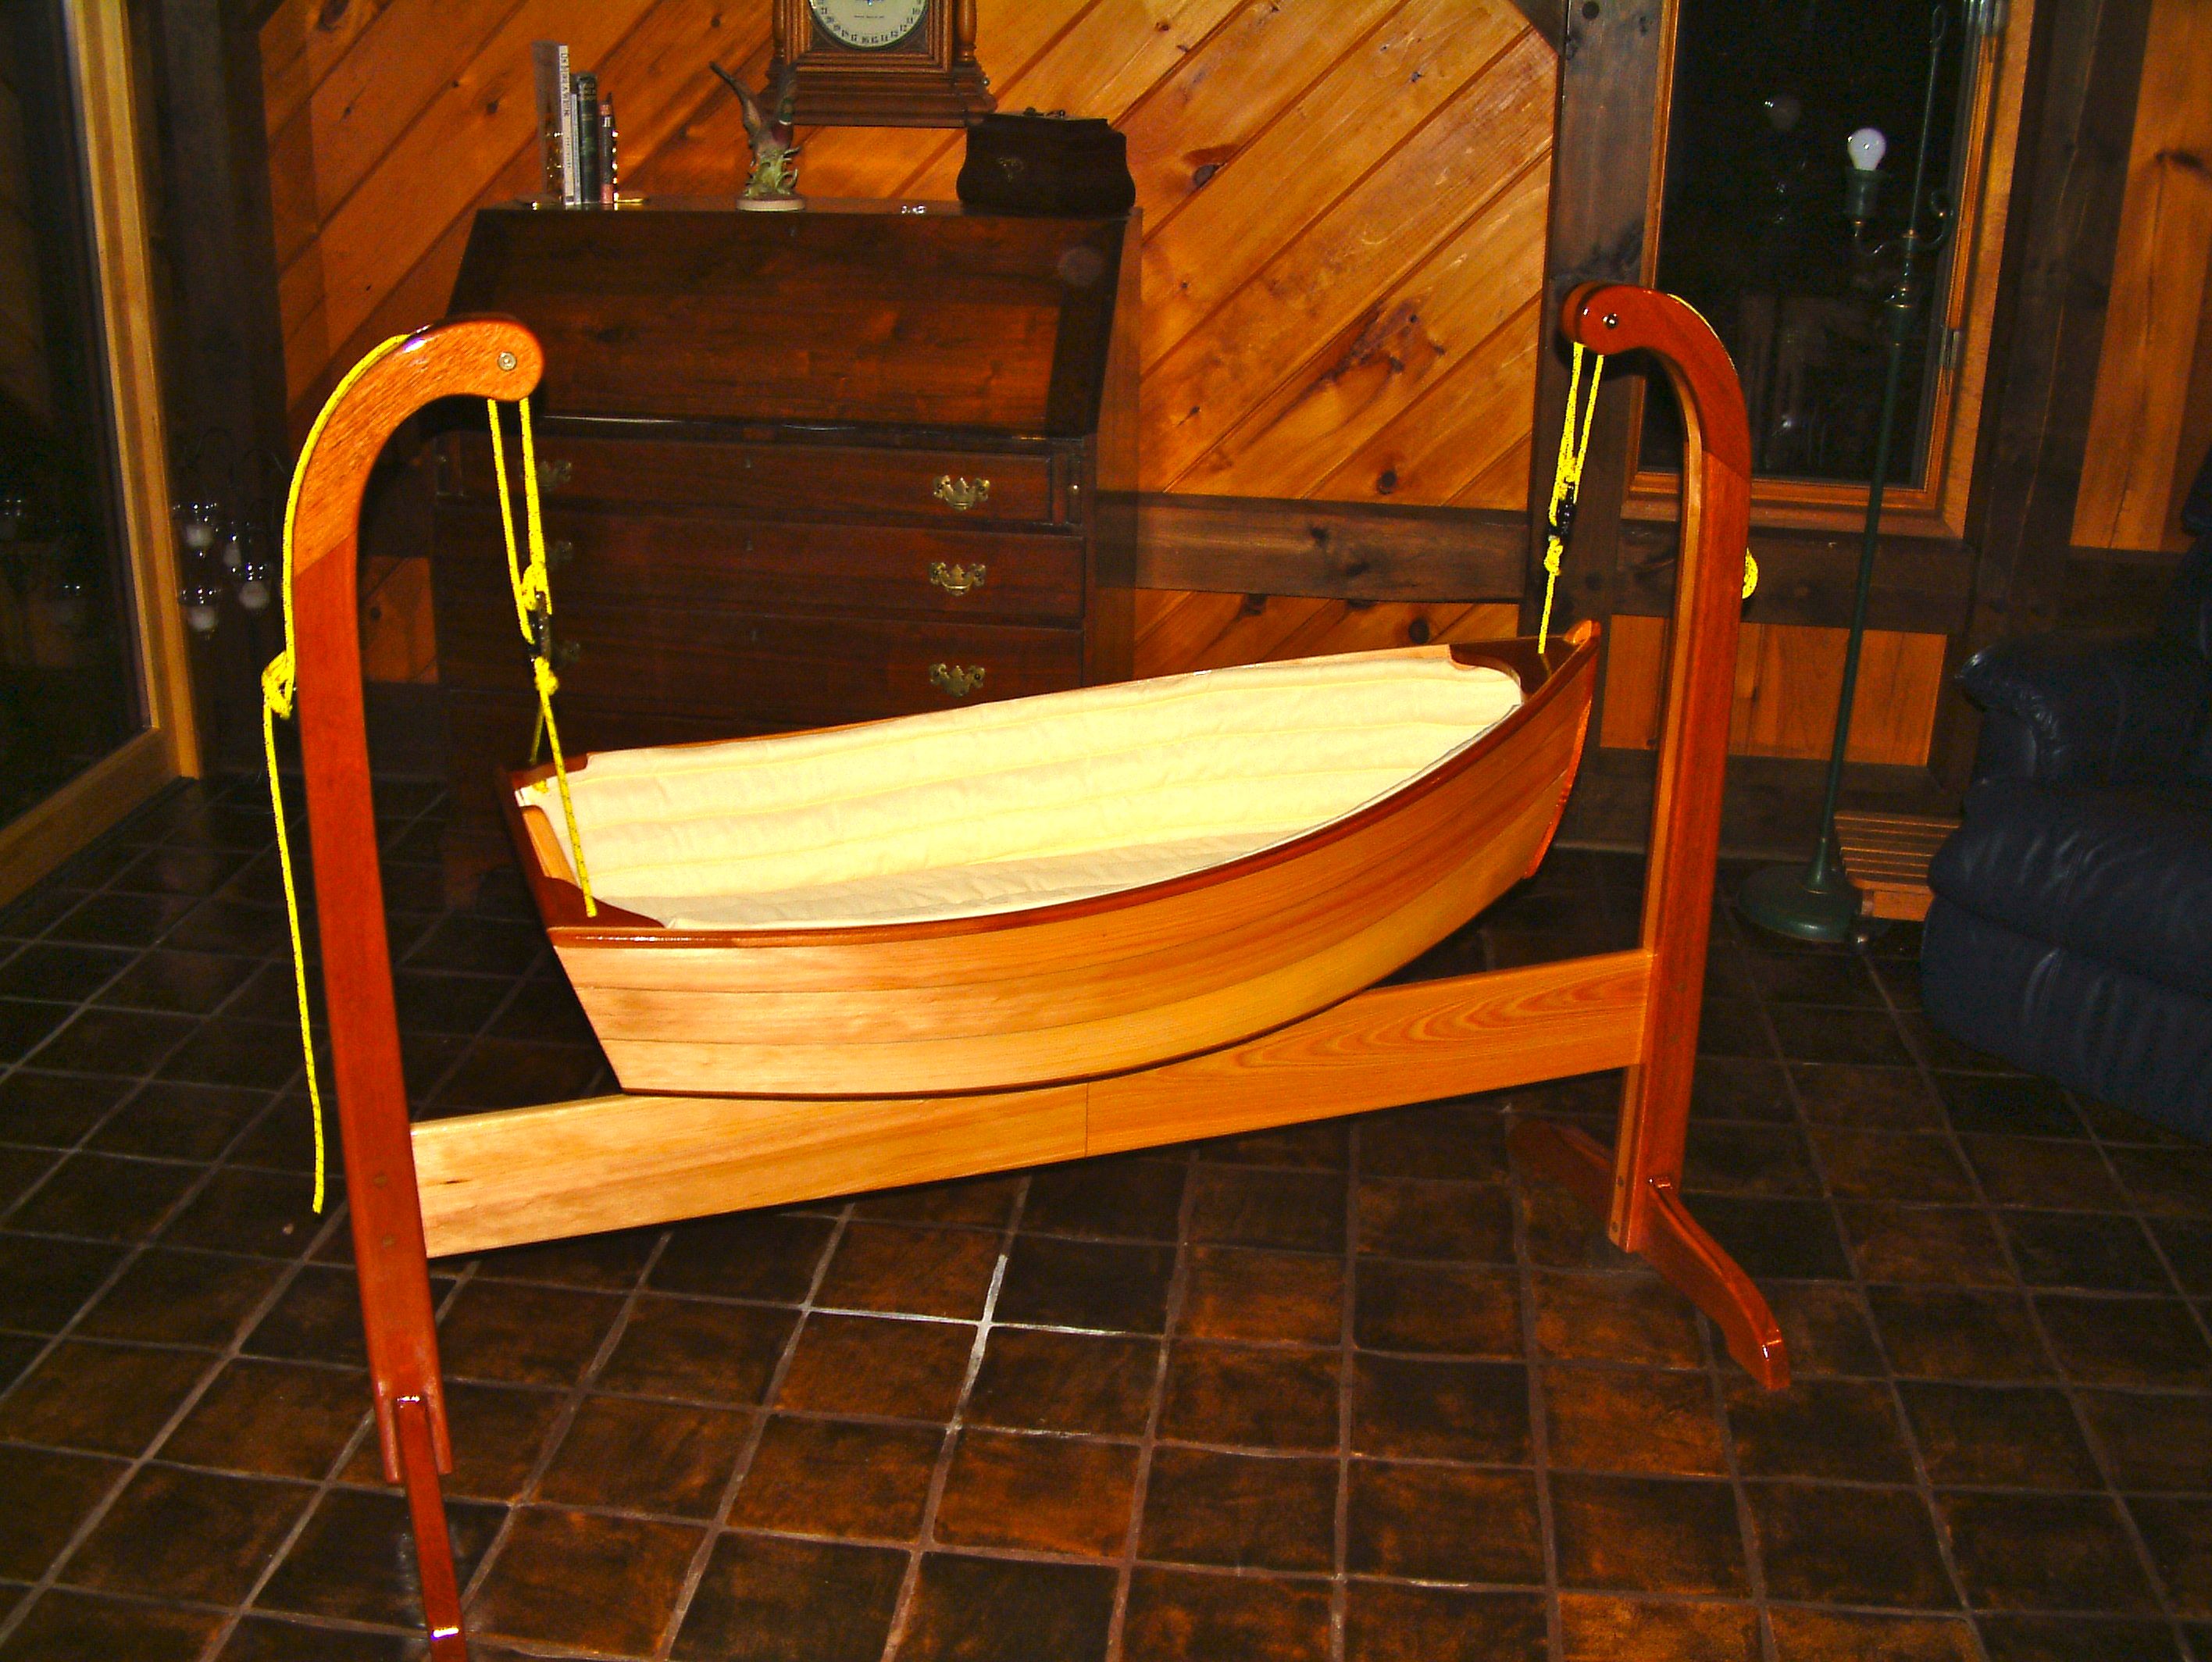 Cradle Boats and more Georgetown Wooden Boat Show 